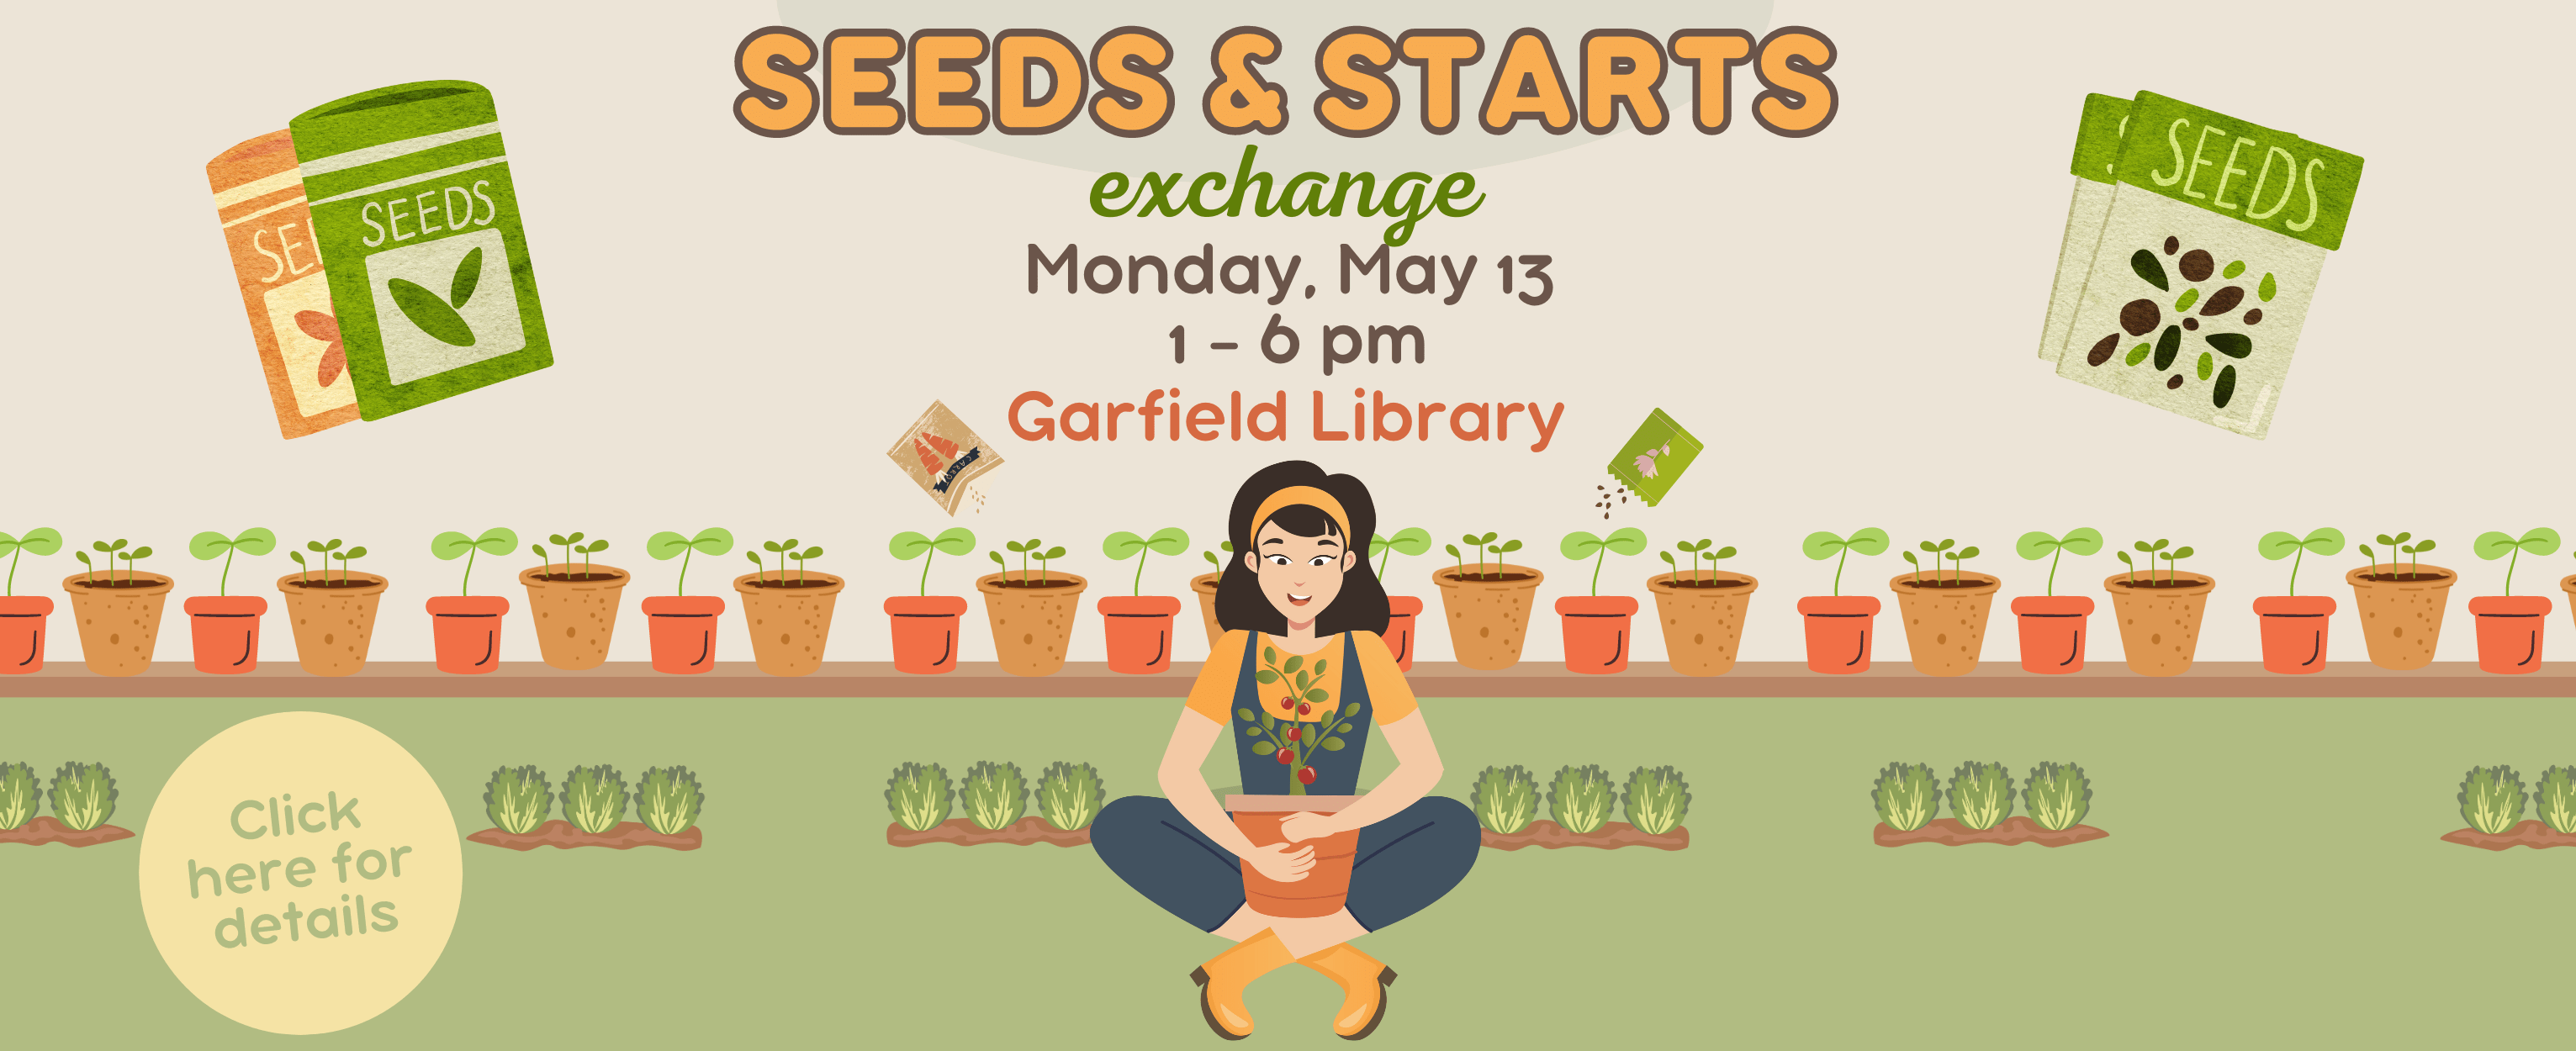 Stop by the Garfield Library on Monday, May 13 between 1-6 PM for free Seeds and Starts! Click here for details. 